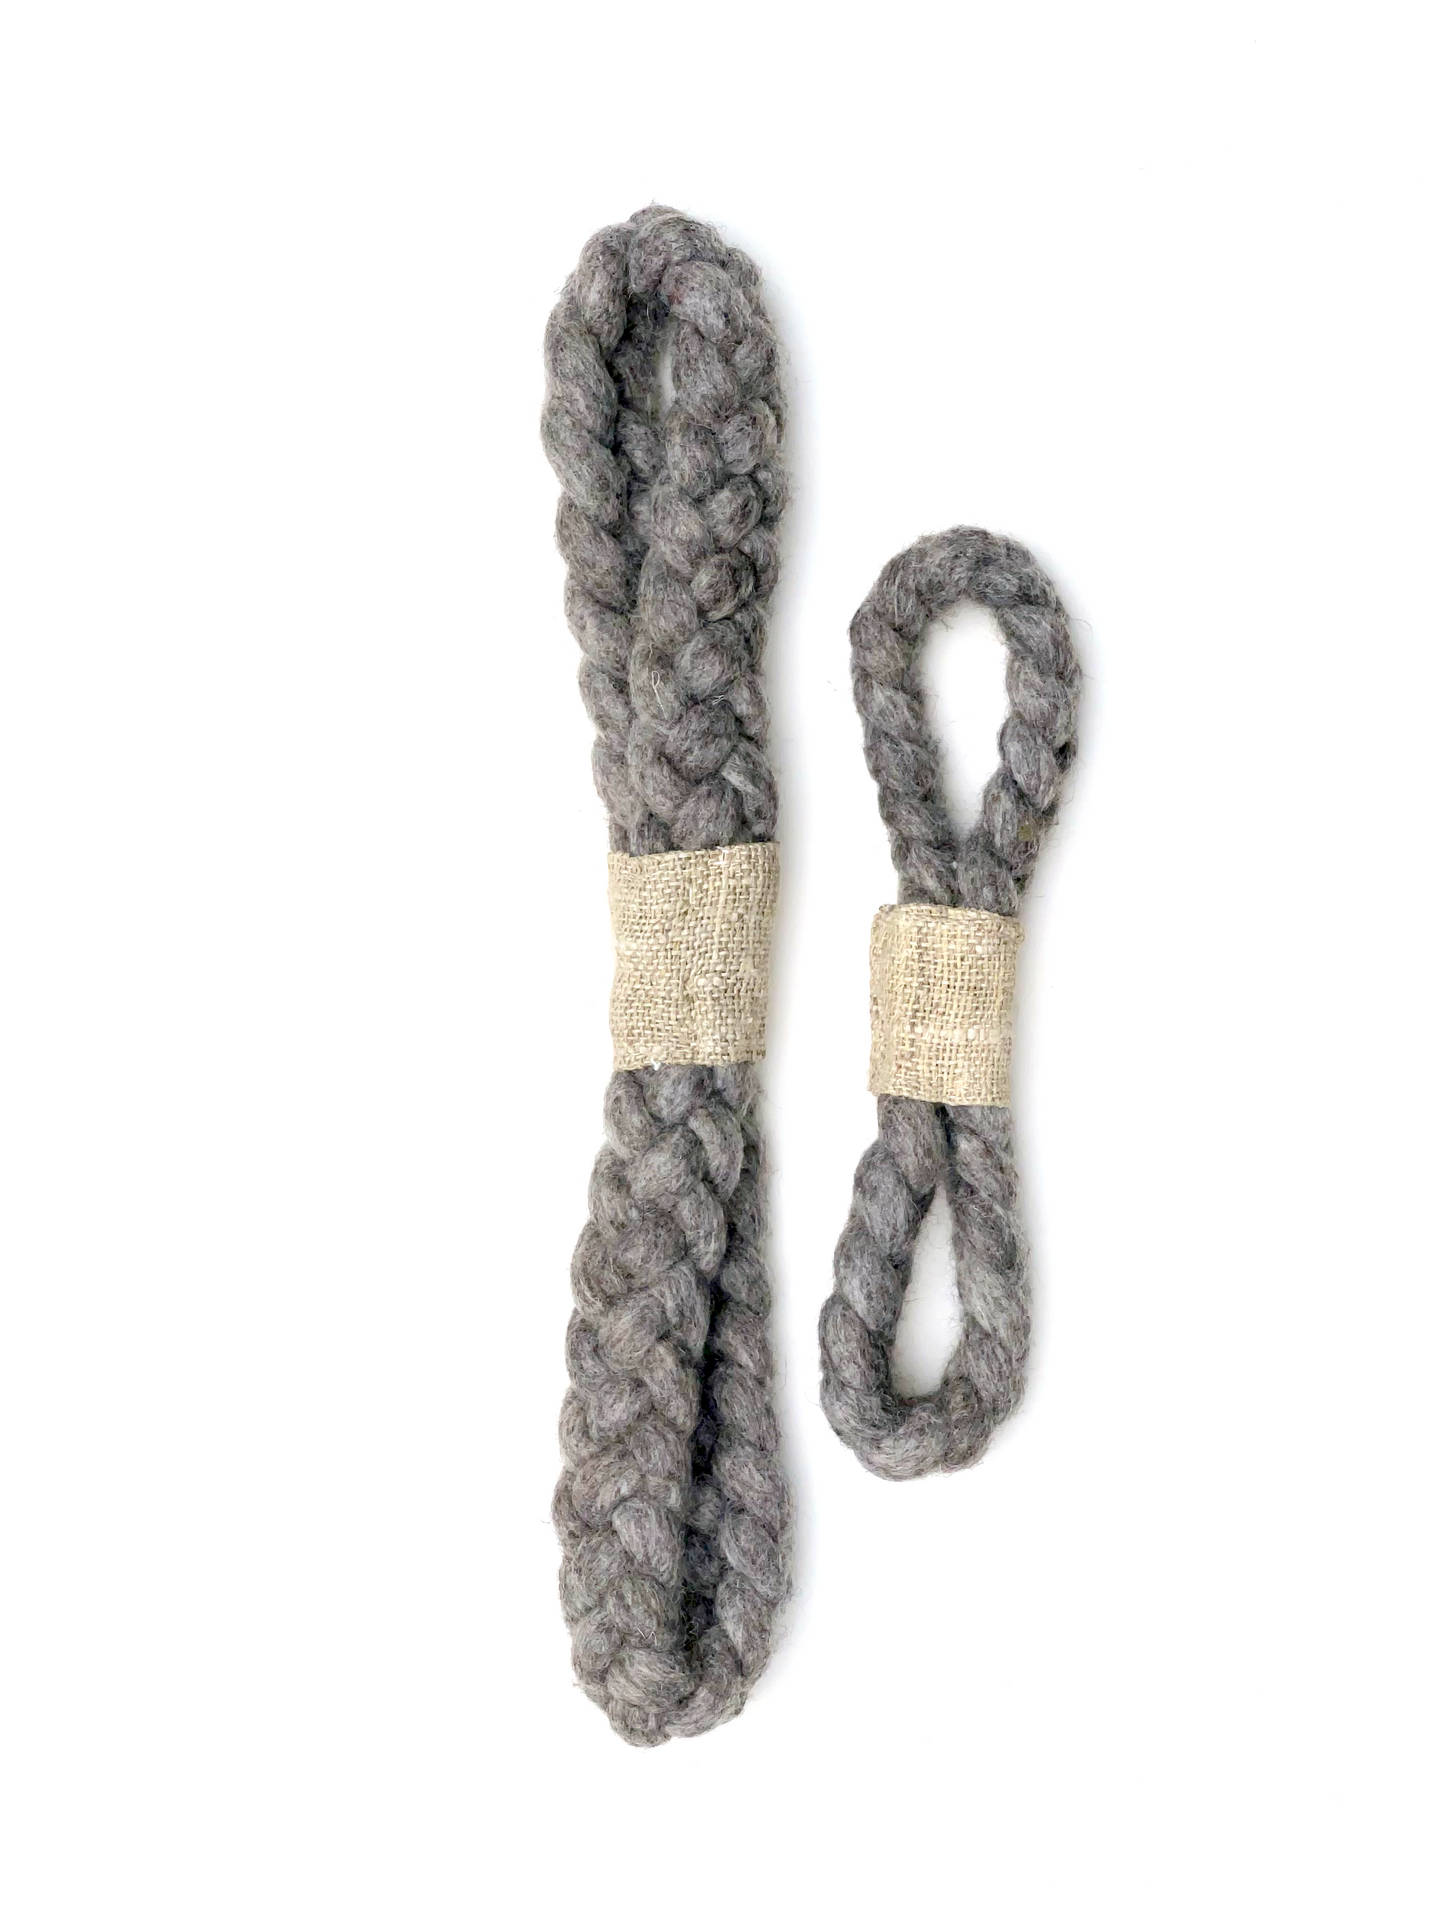 Wool Loop Dog Toy with Hemp in Natural